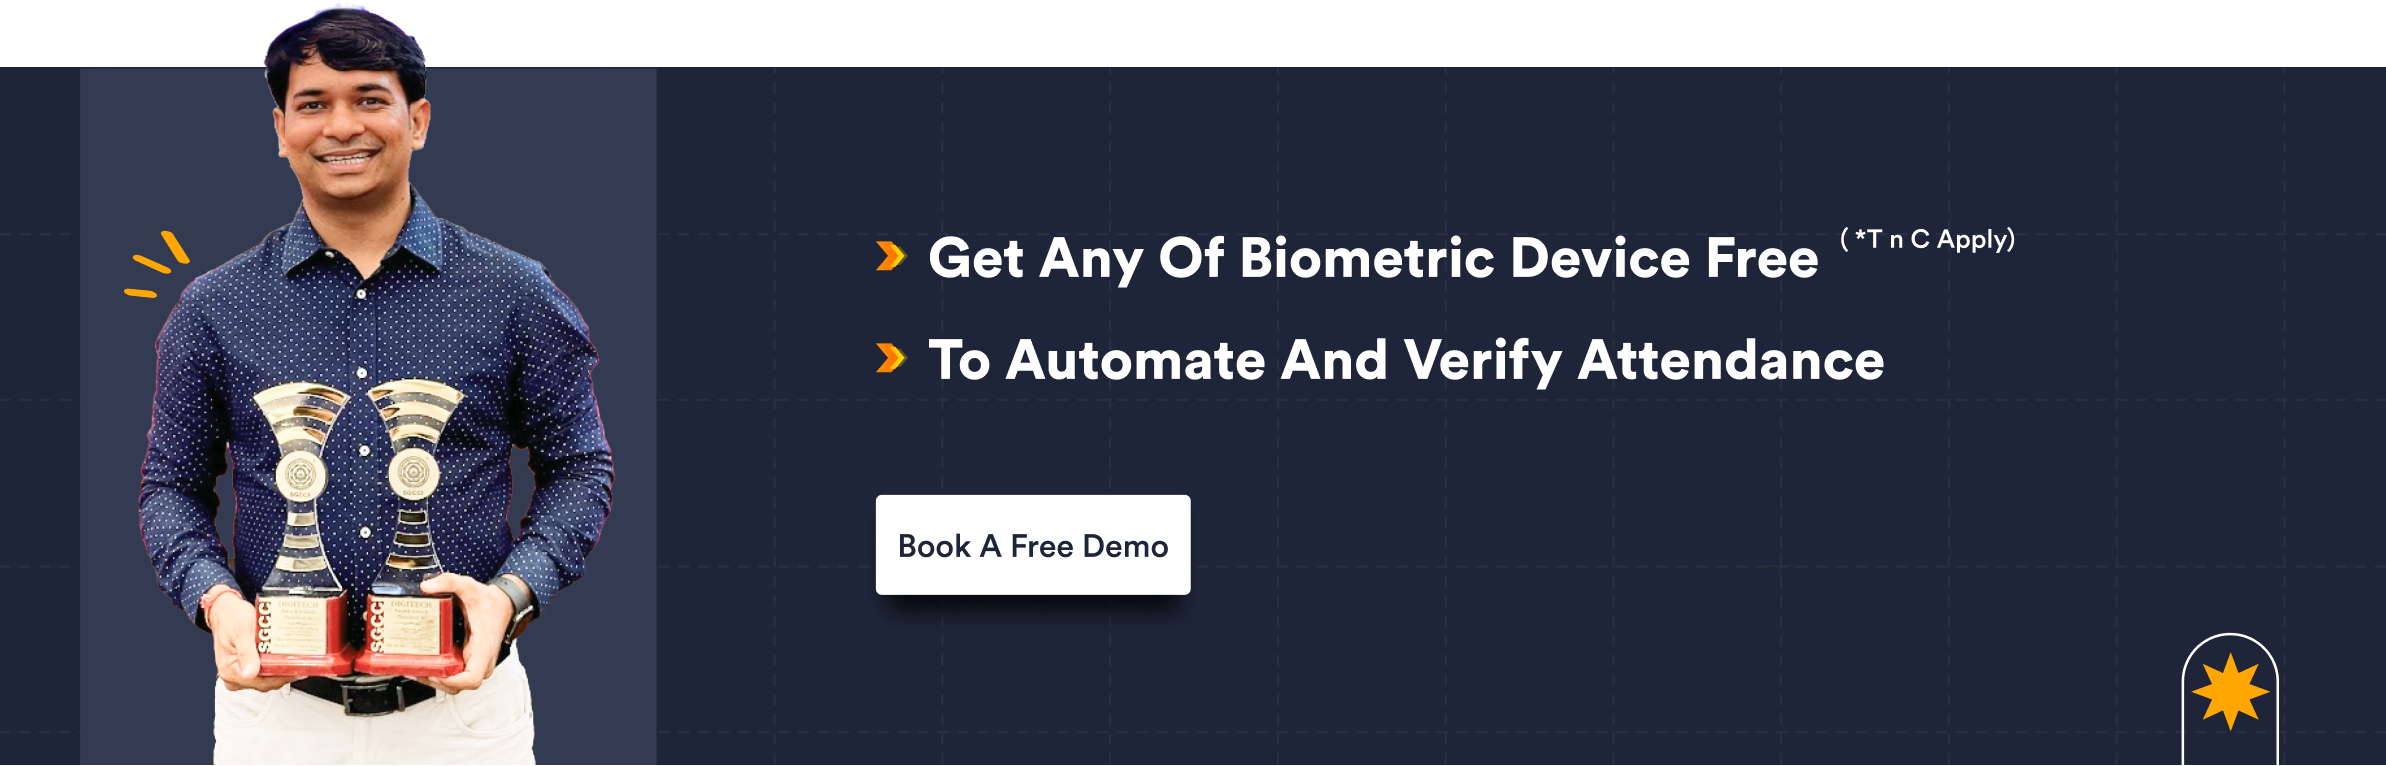 Get Any Of Biometric Device Free 1